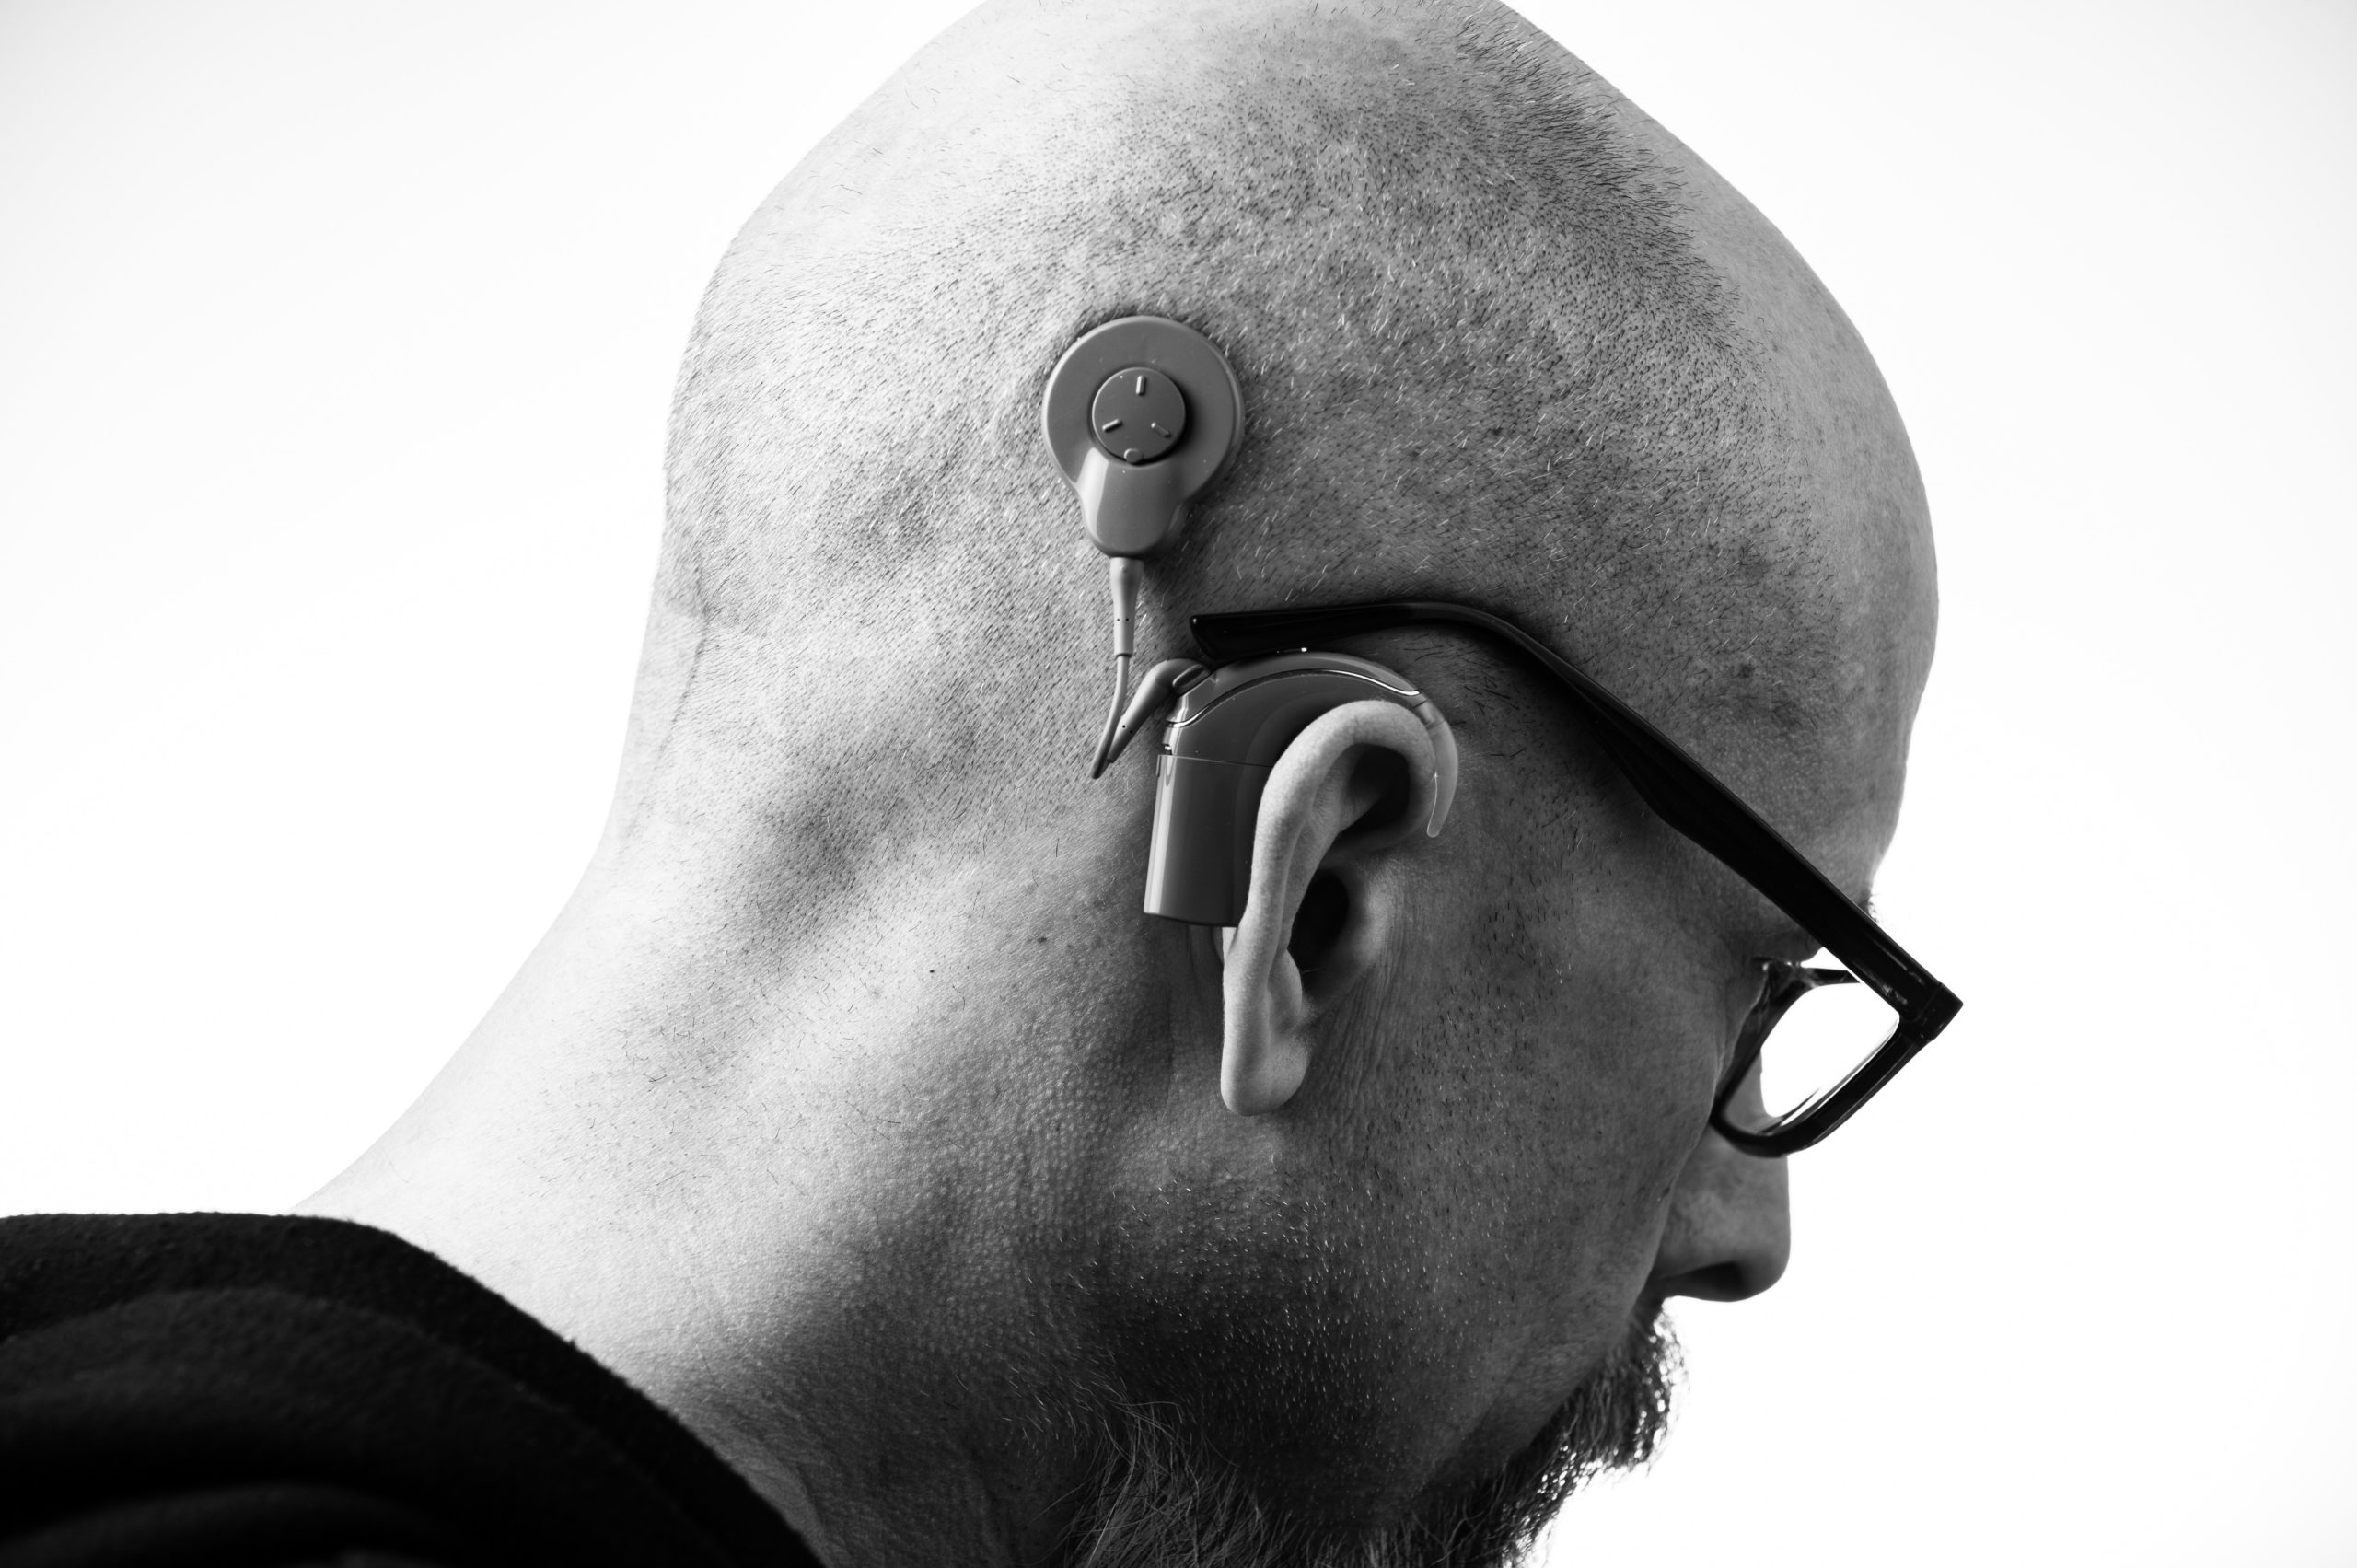 This pictures shows a cochlear implant being used to hear better.